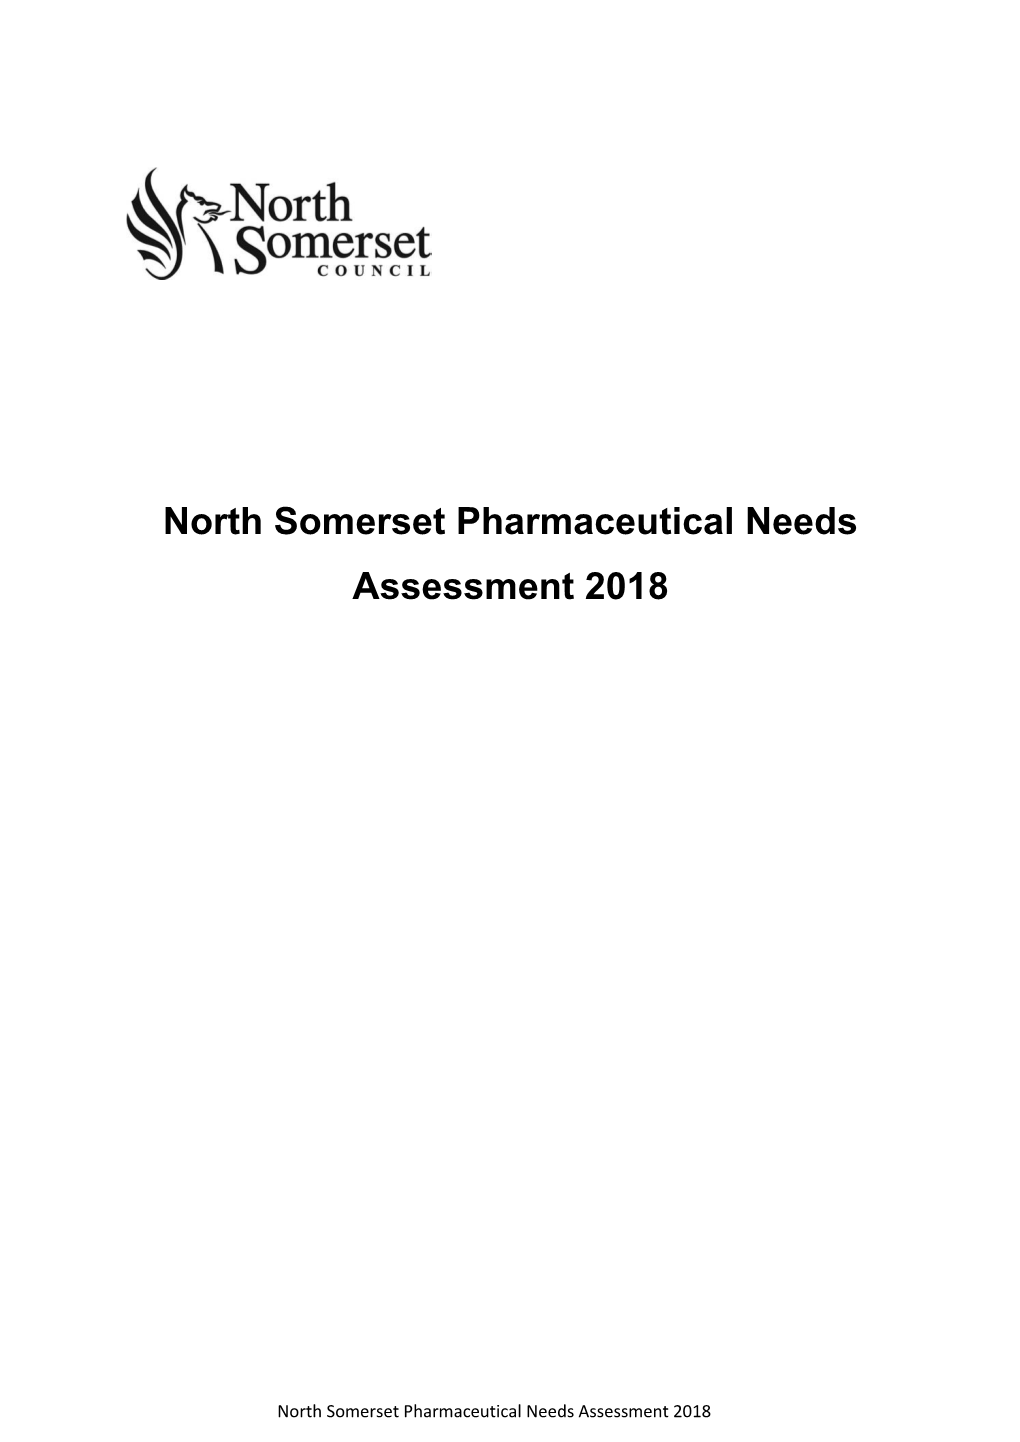 North Somerset Pharmaceutical Needs Assessment 2018